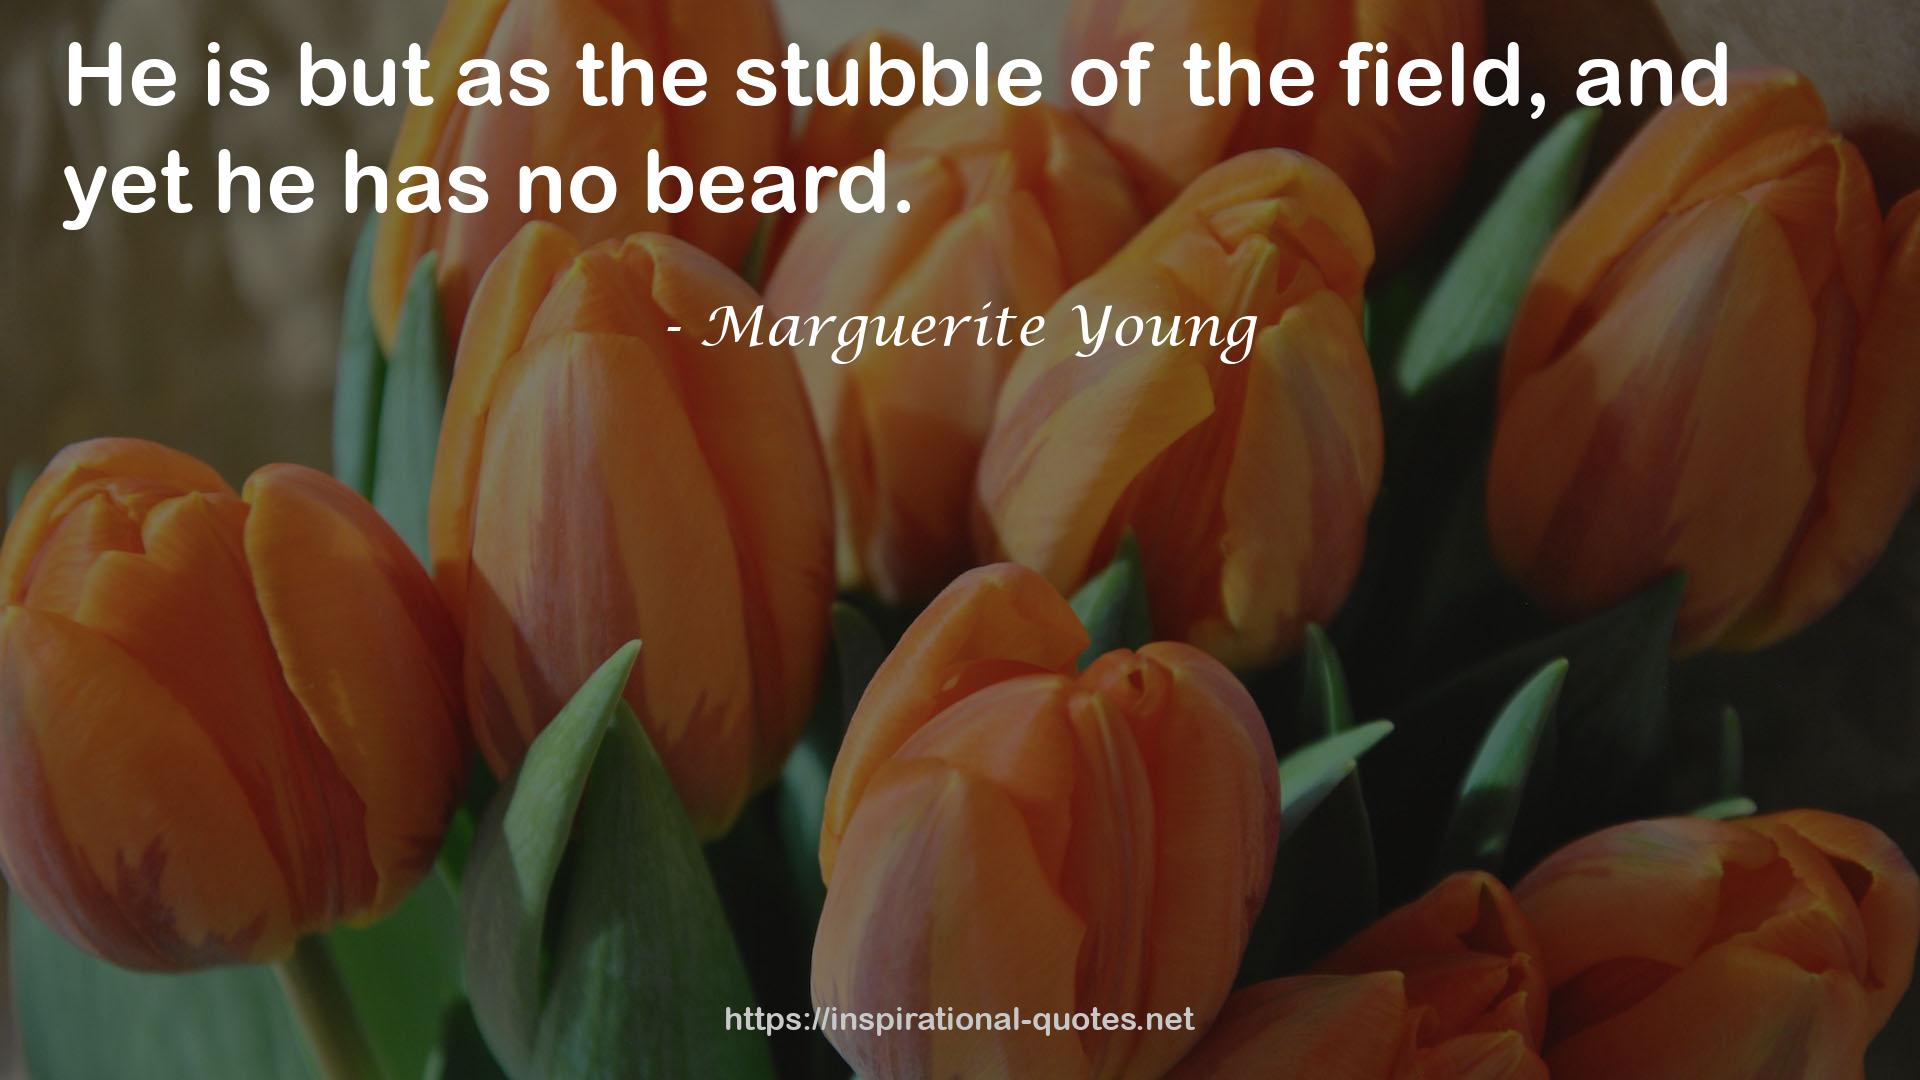 Marguerite Young QUOTES